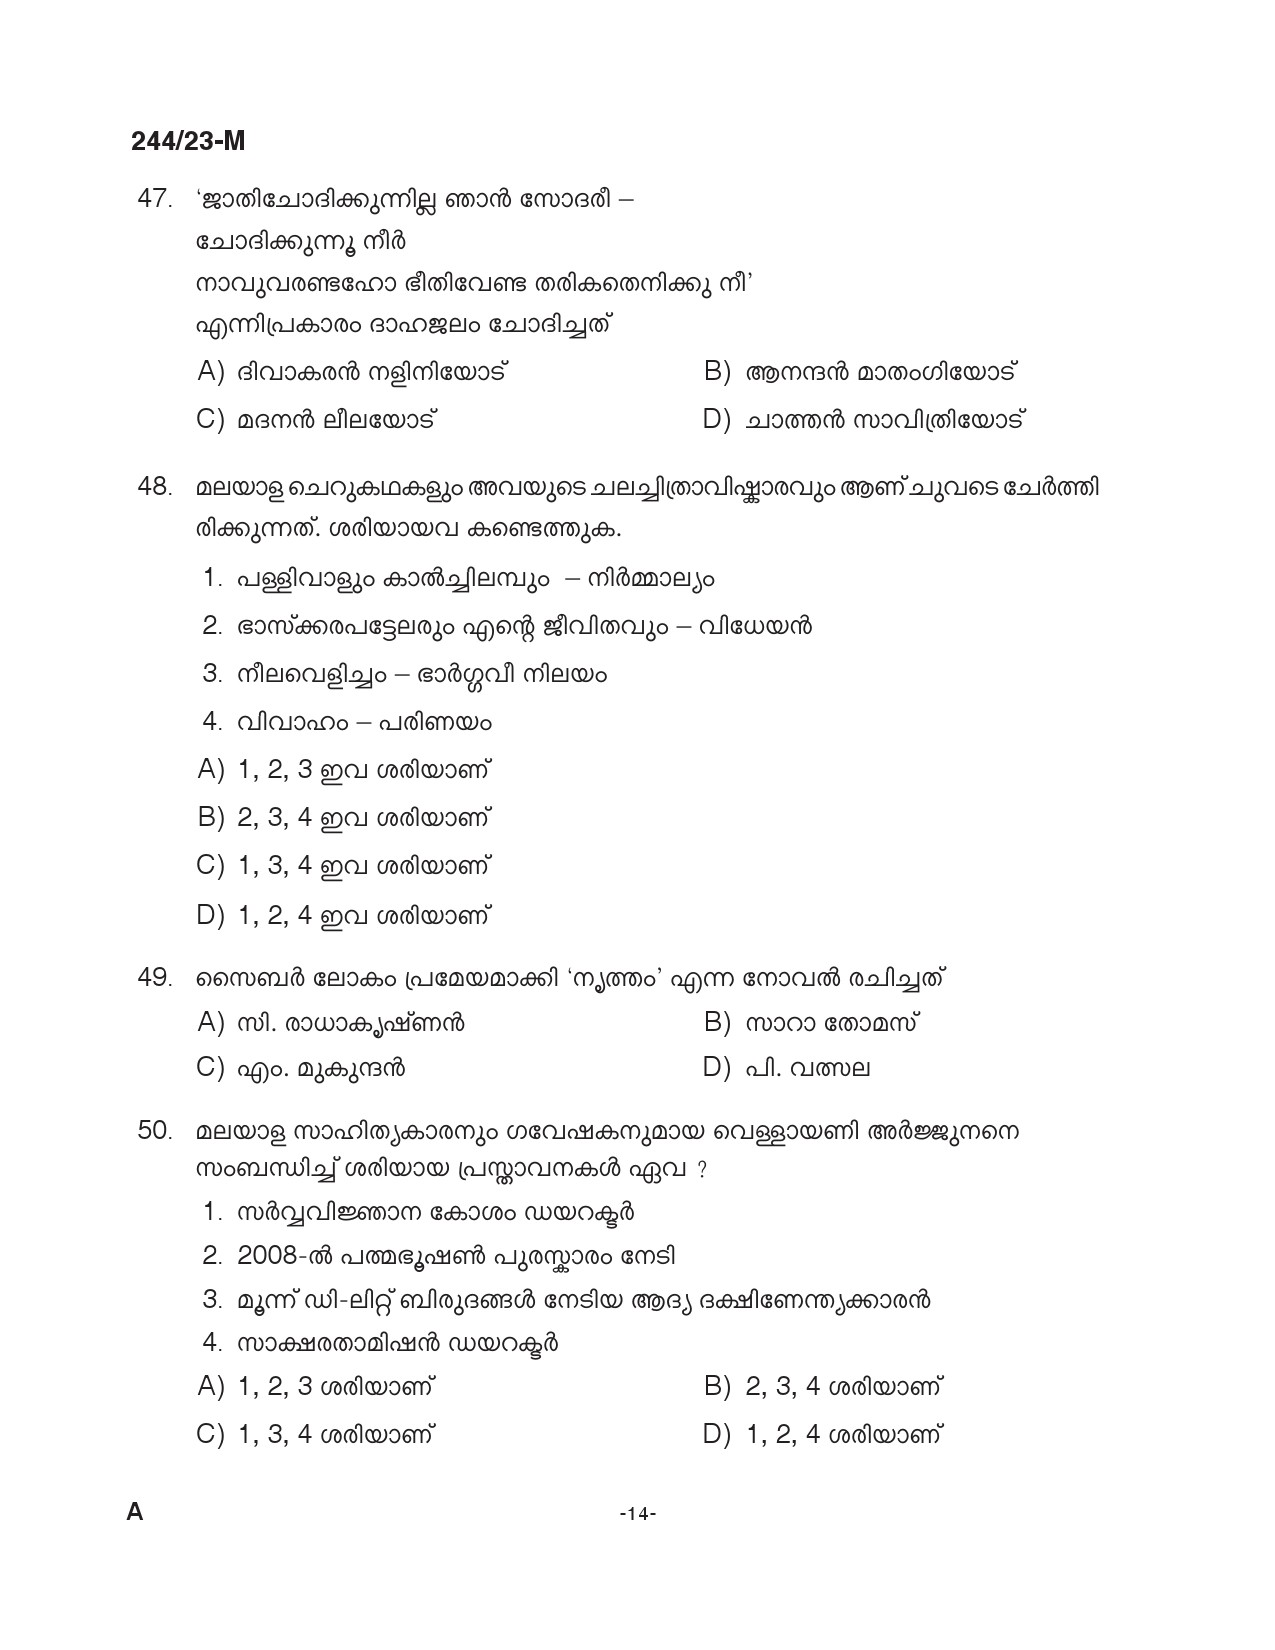 KPSC Fire and Rescue Officer Trainee Malayalam Exam 2023 Code 2442023 M 13